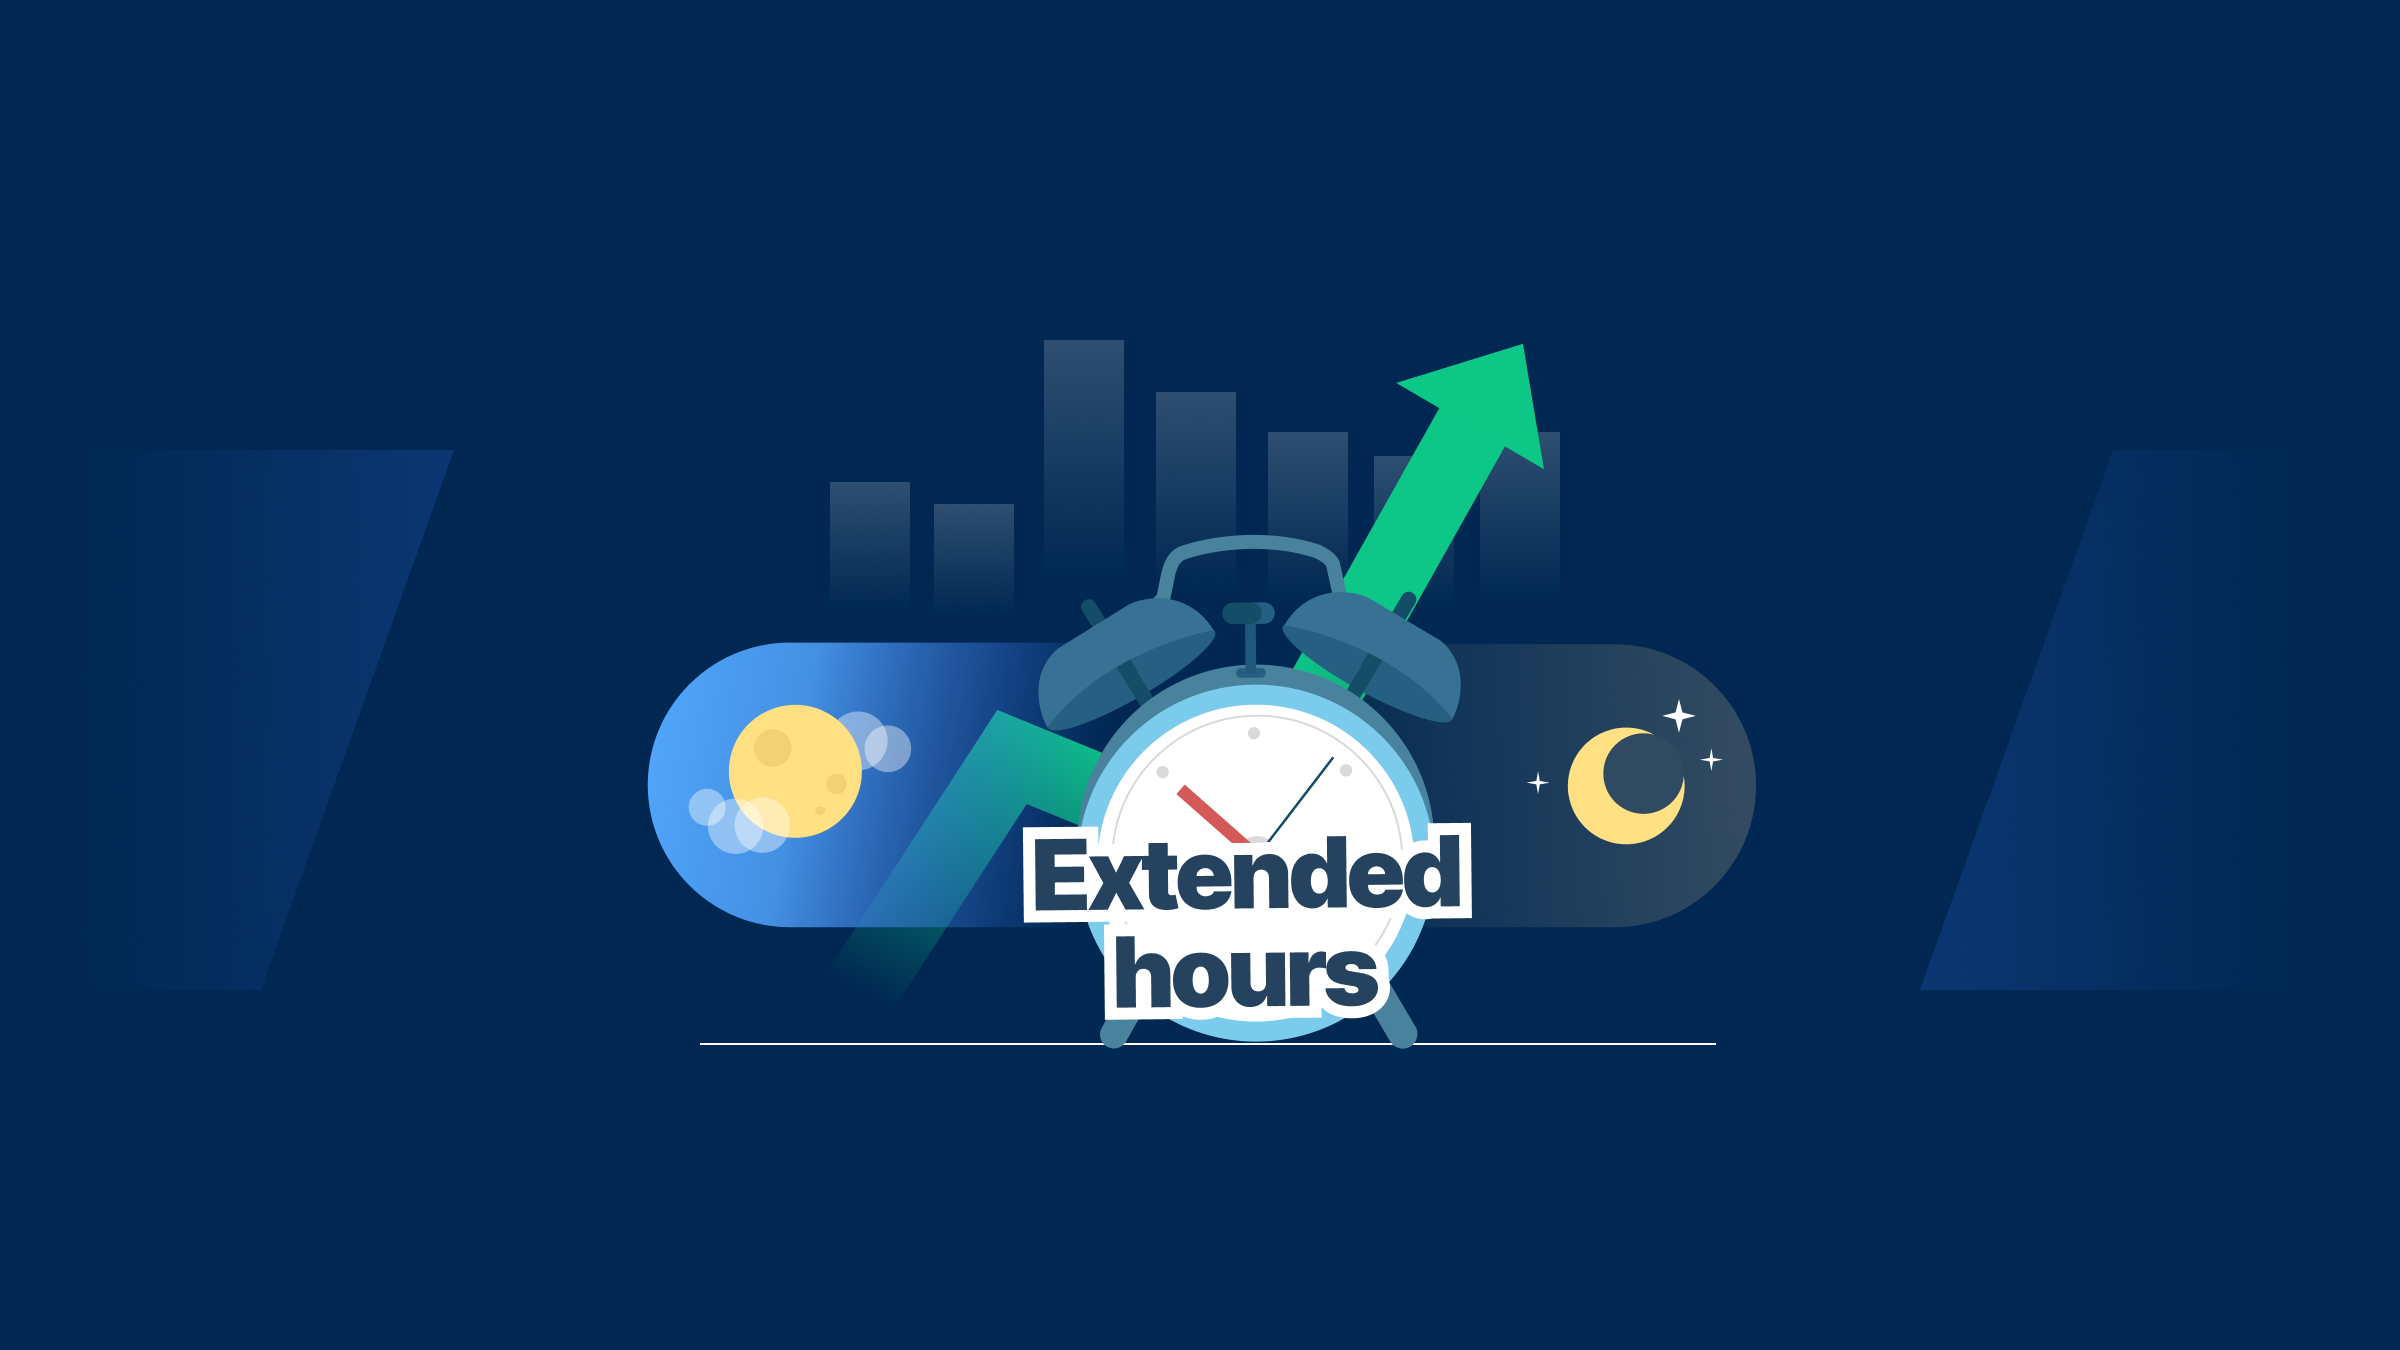 What stocks/ETFs can be traded on Vested during Extended Hours?